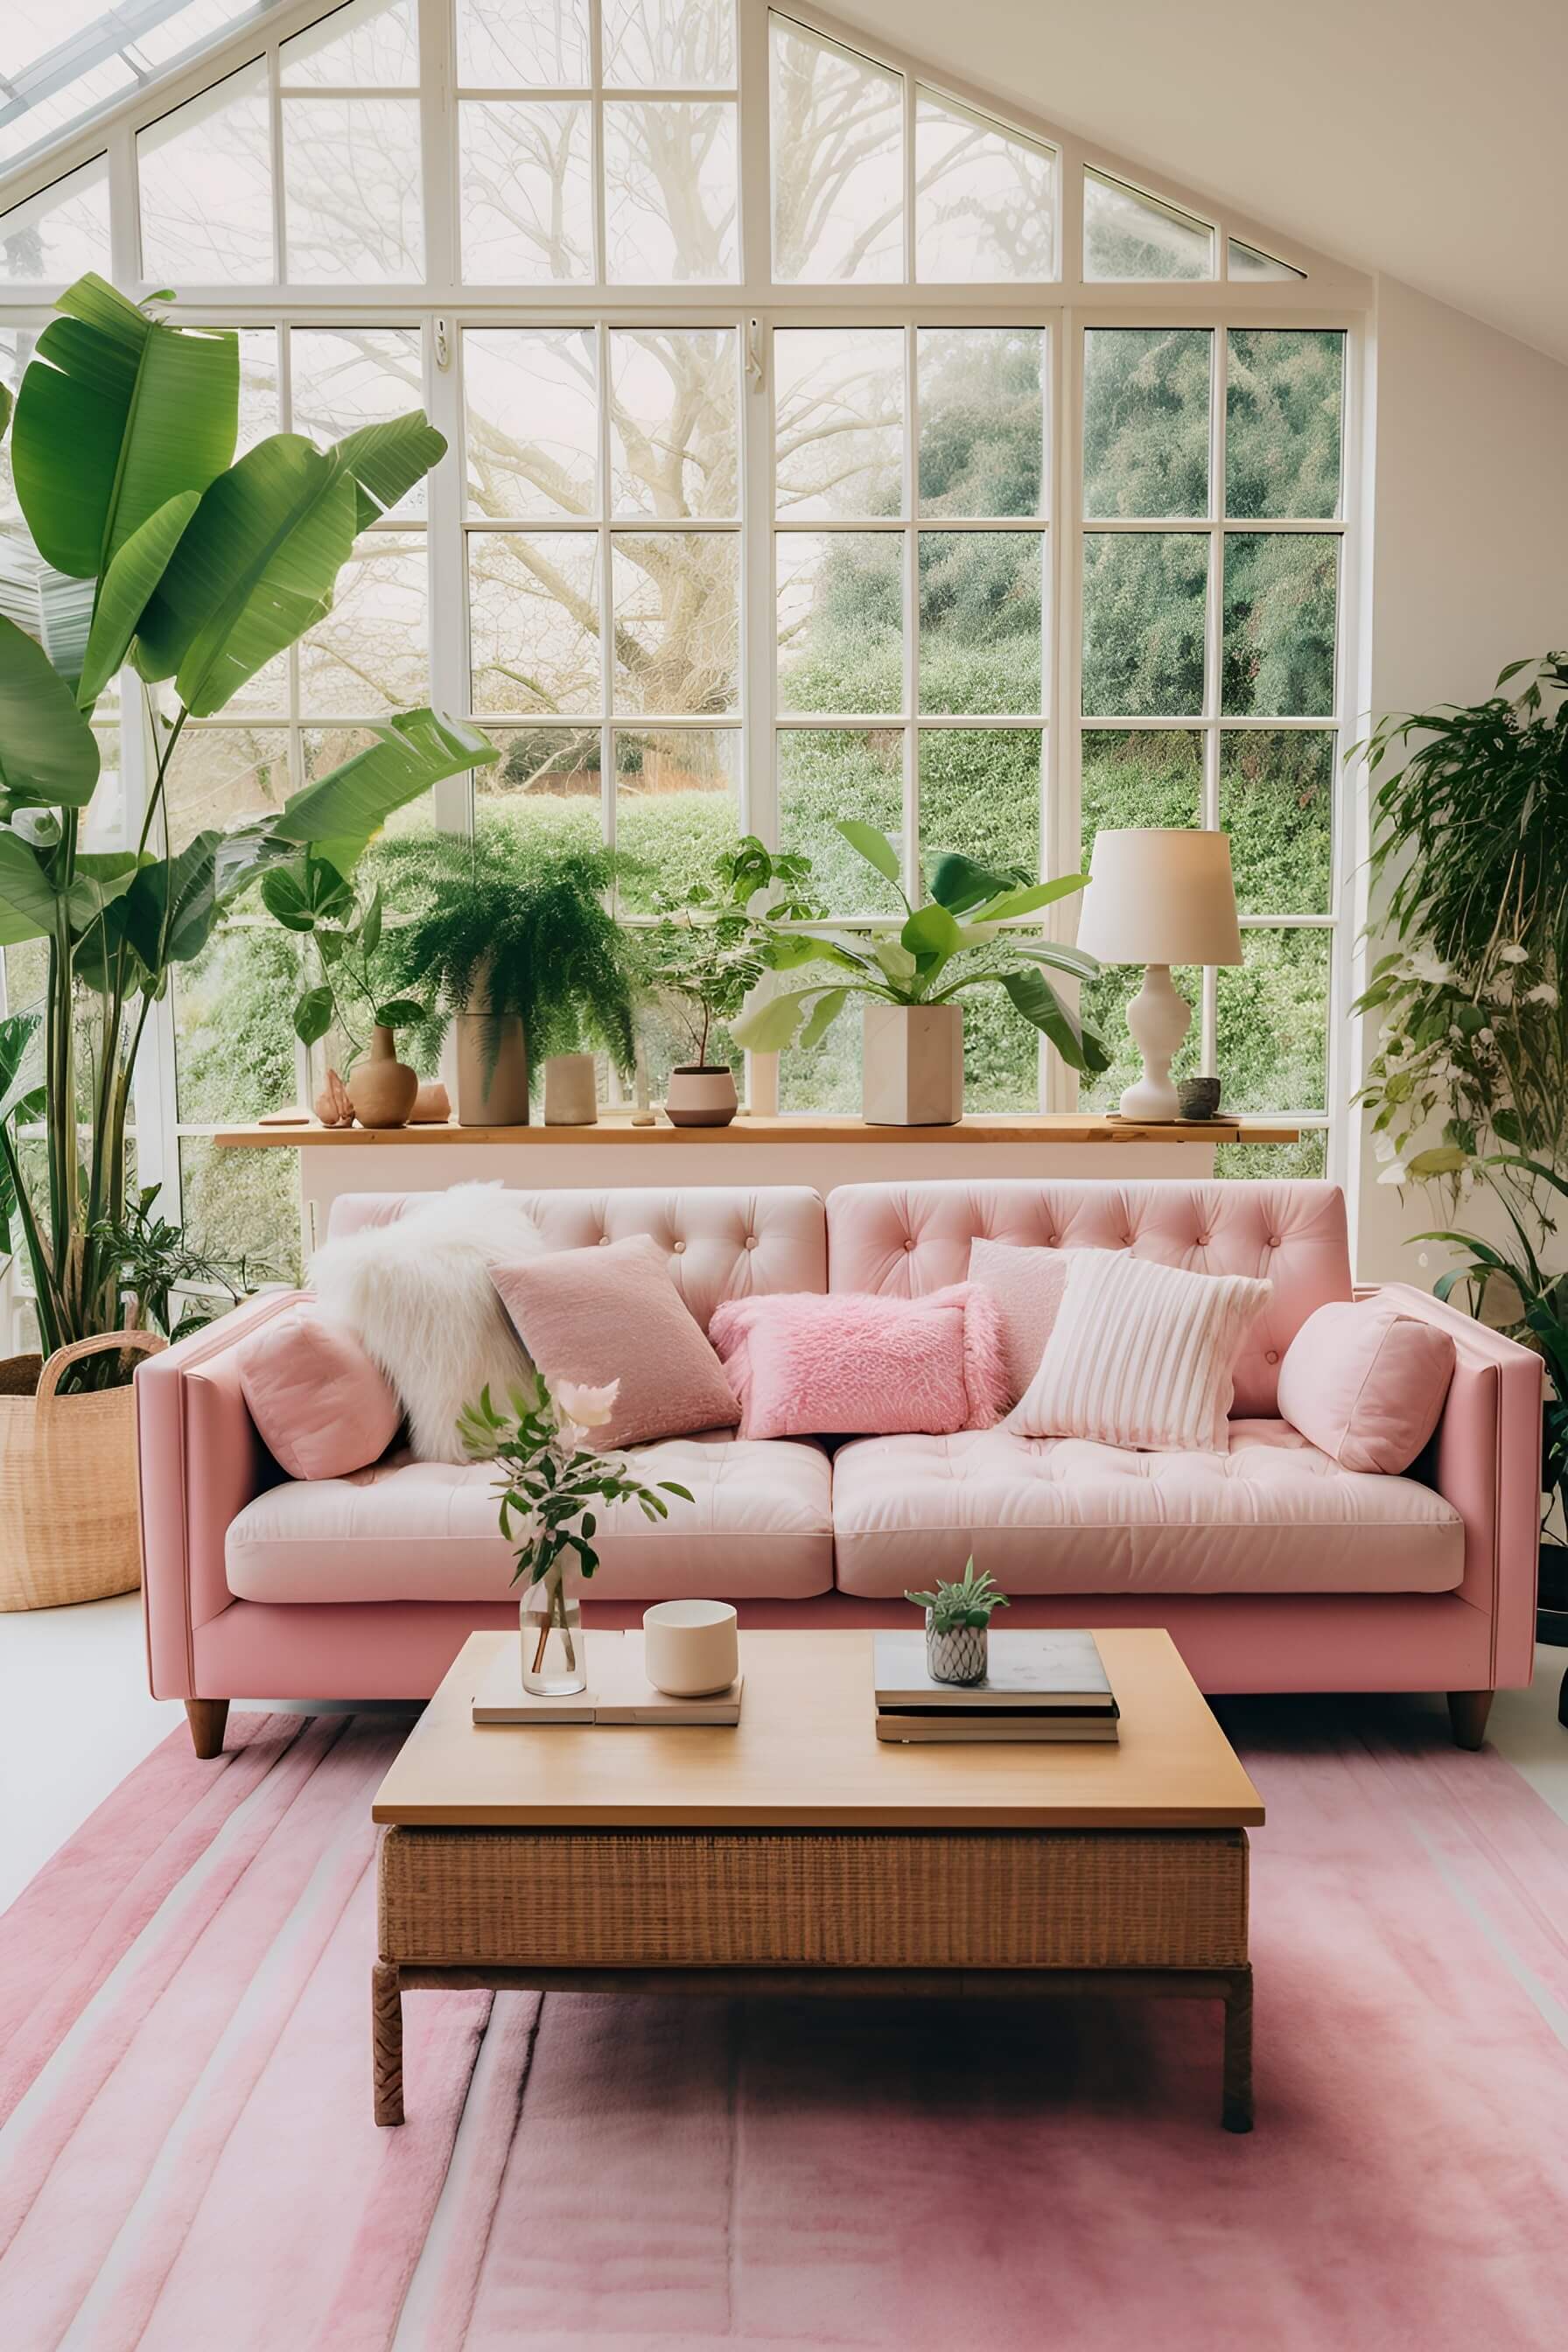 a living room with large windows overlooking a garden, with a pink couch and lots of plants